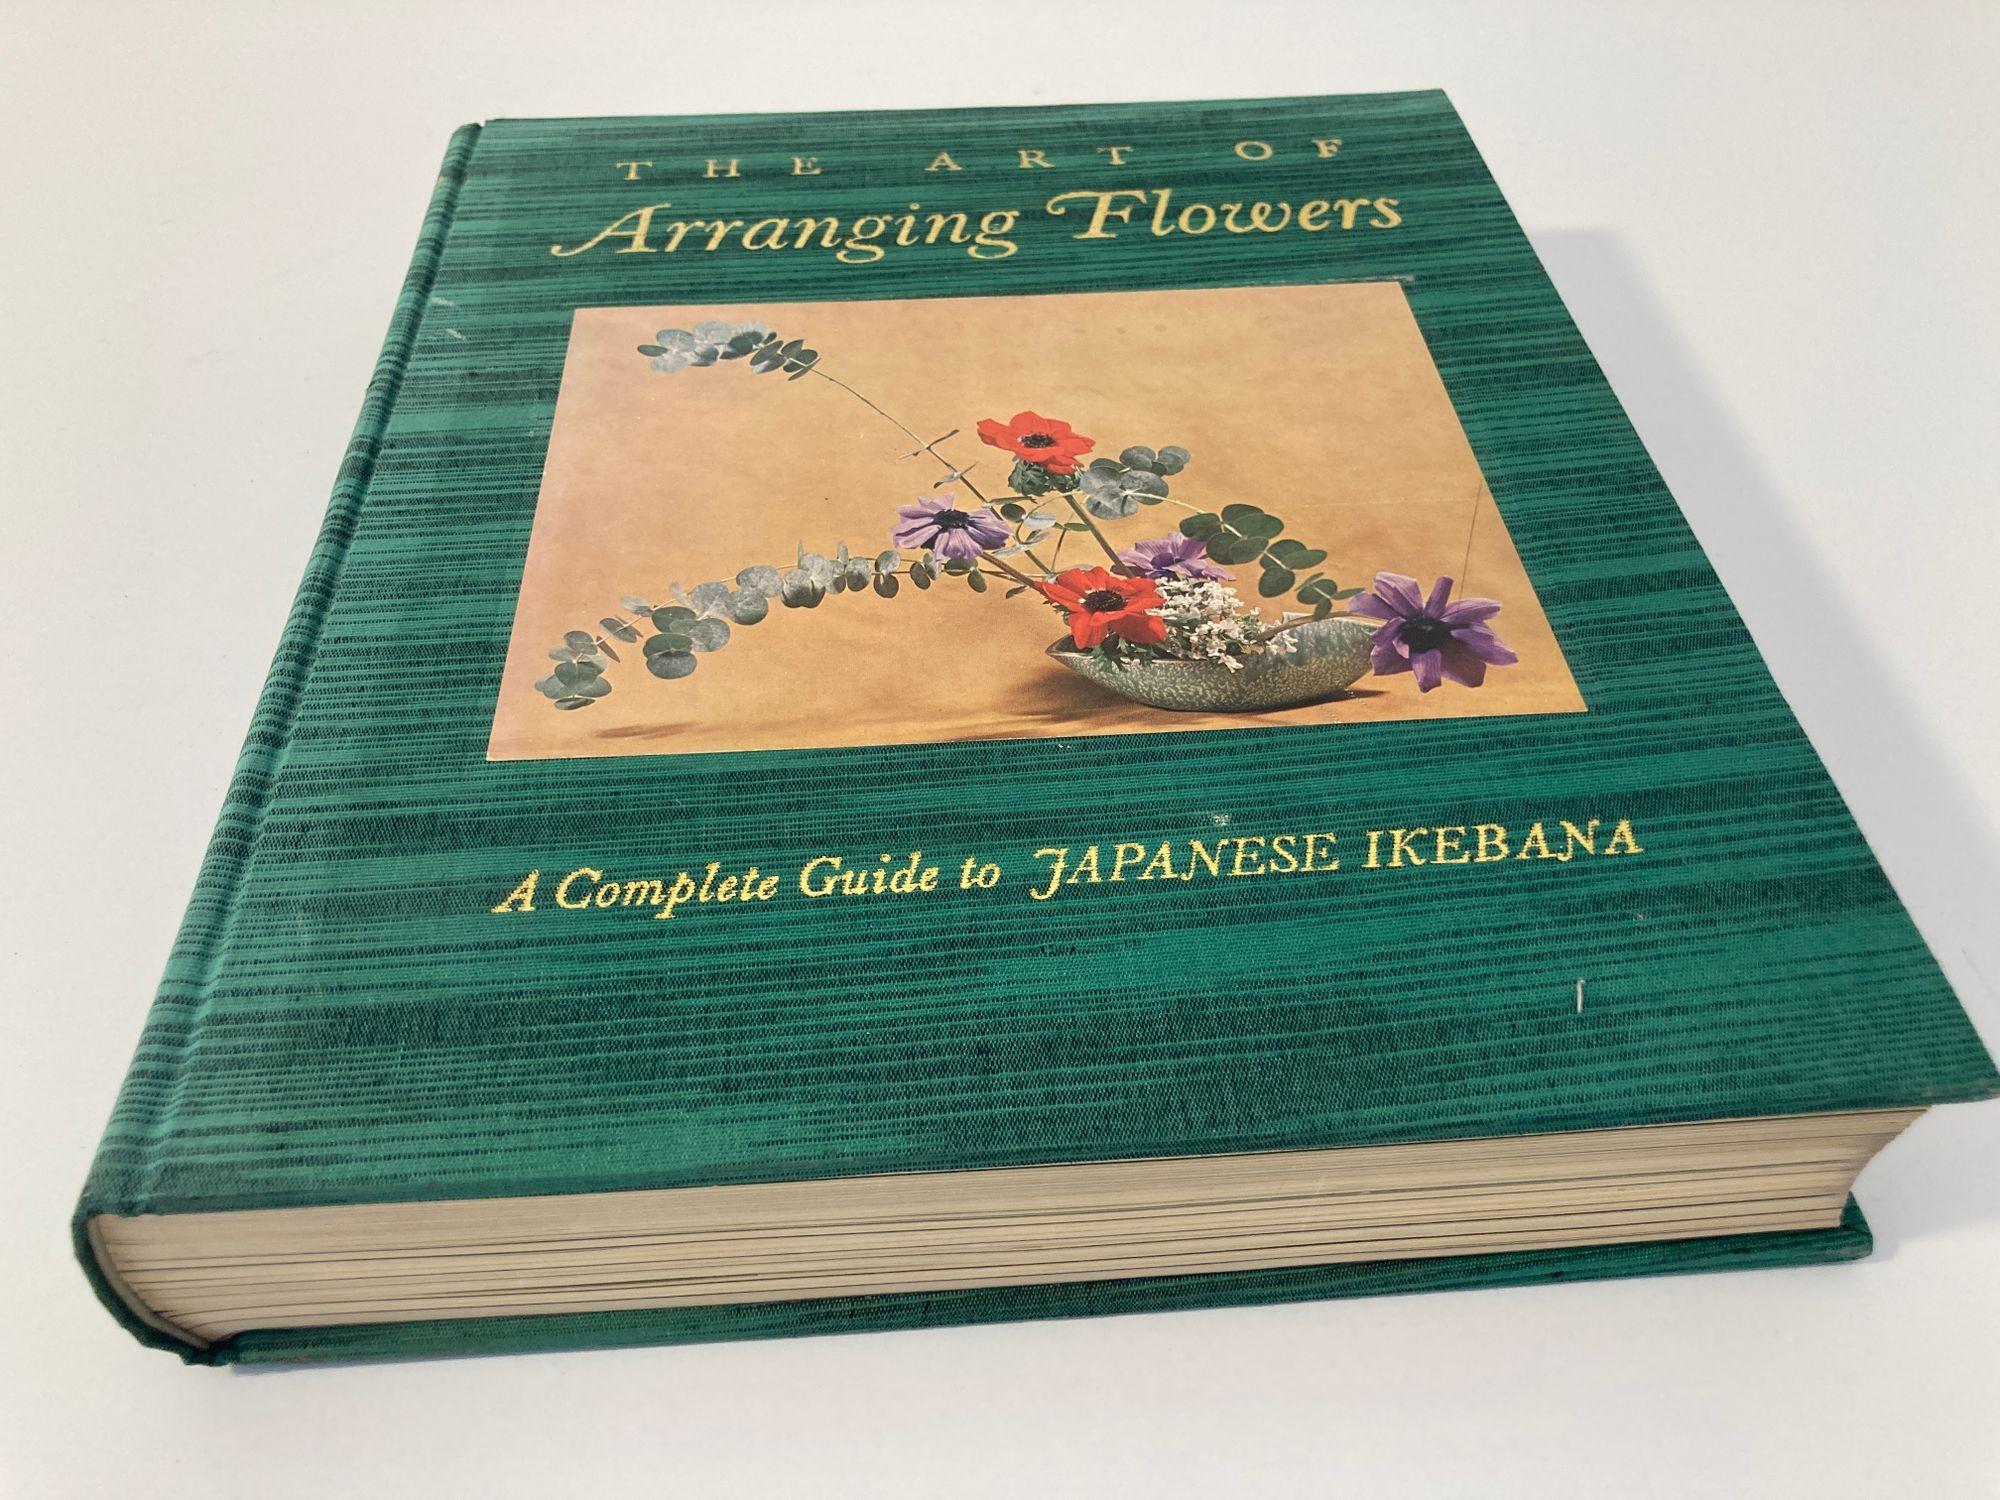 The Art of Arranging Flowers, A Complete Guide to Japanese Ikebana by Shozo Sat 9